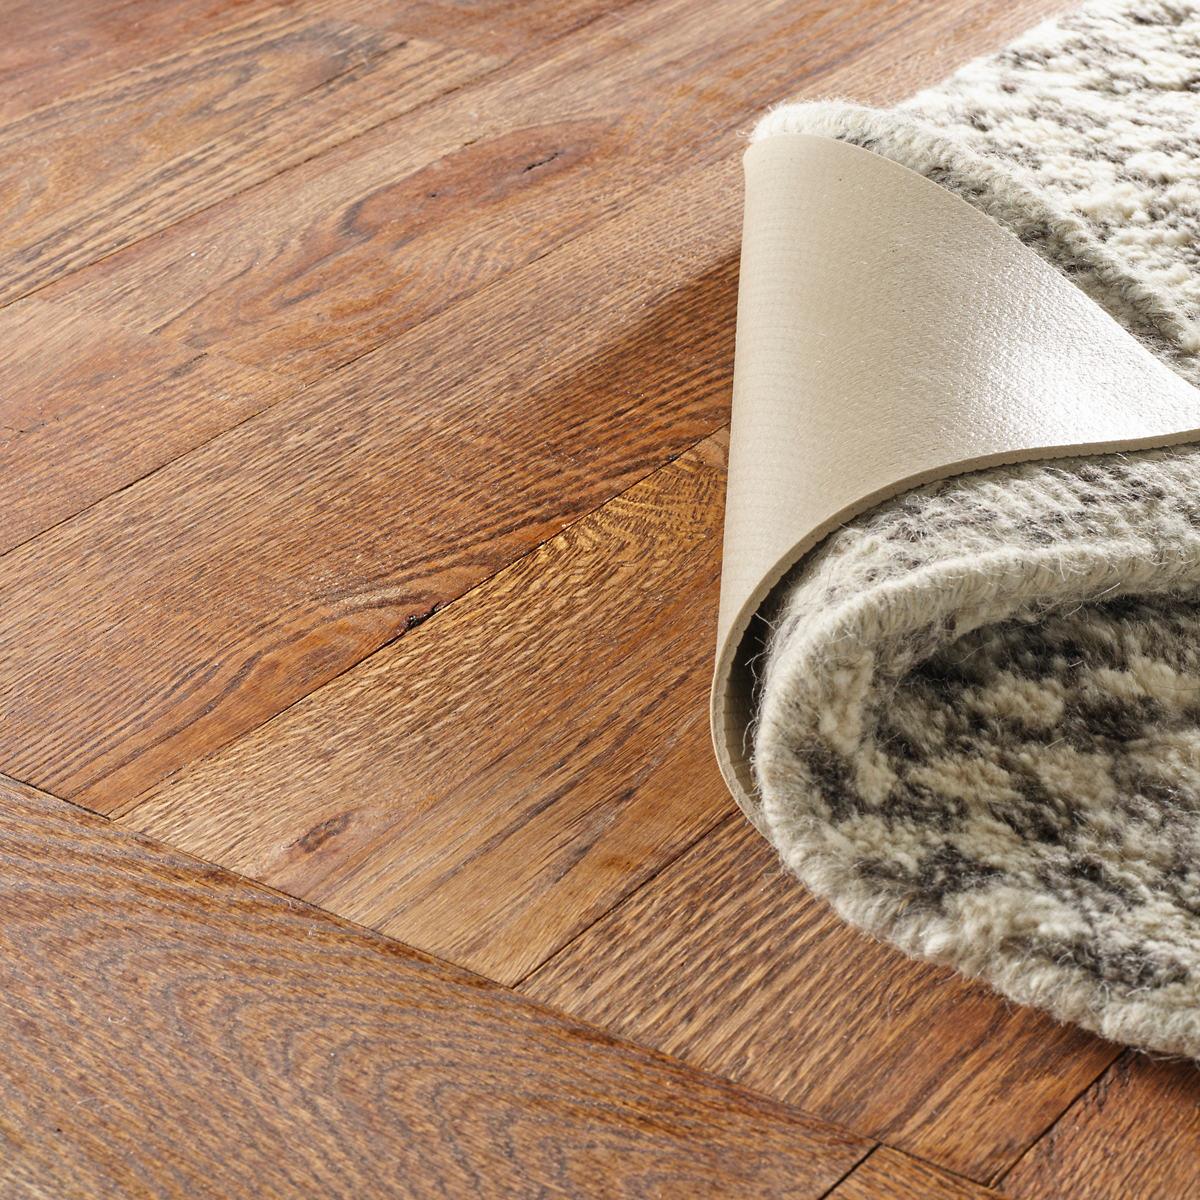 Solid Extra Grip Rug Pad Dash Albert, What Kind Of Rug Pad Is Safe For Vinyl Plank Flooring